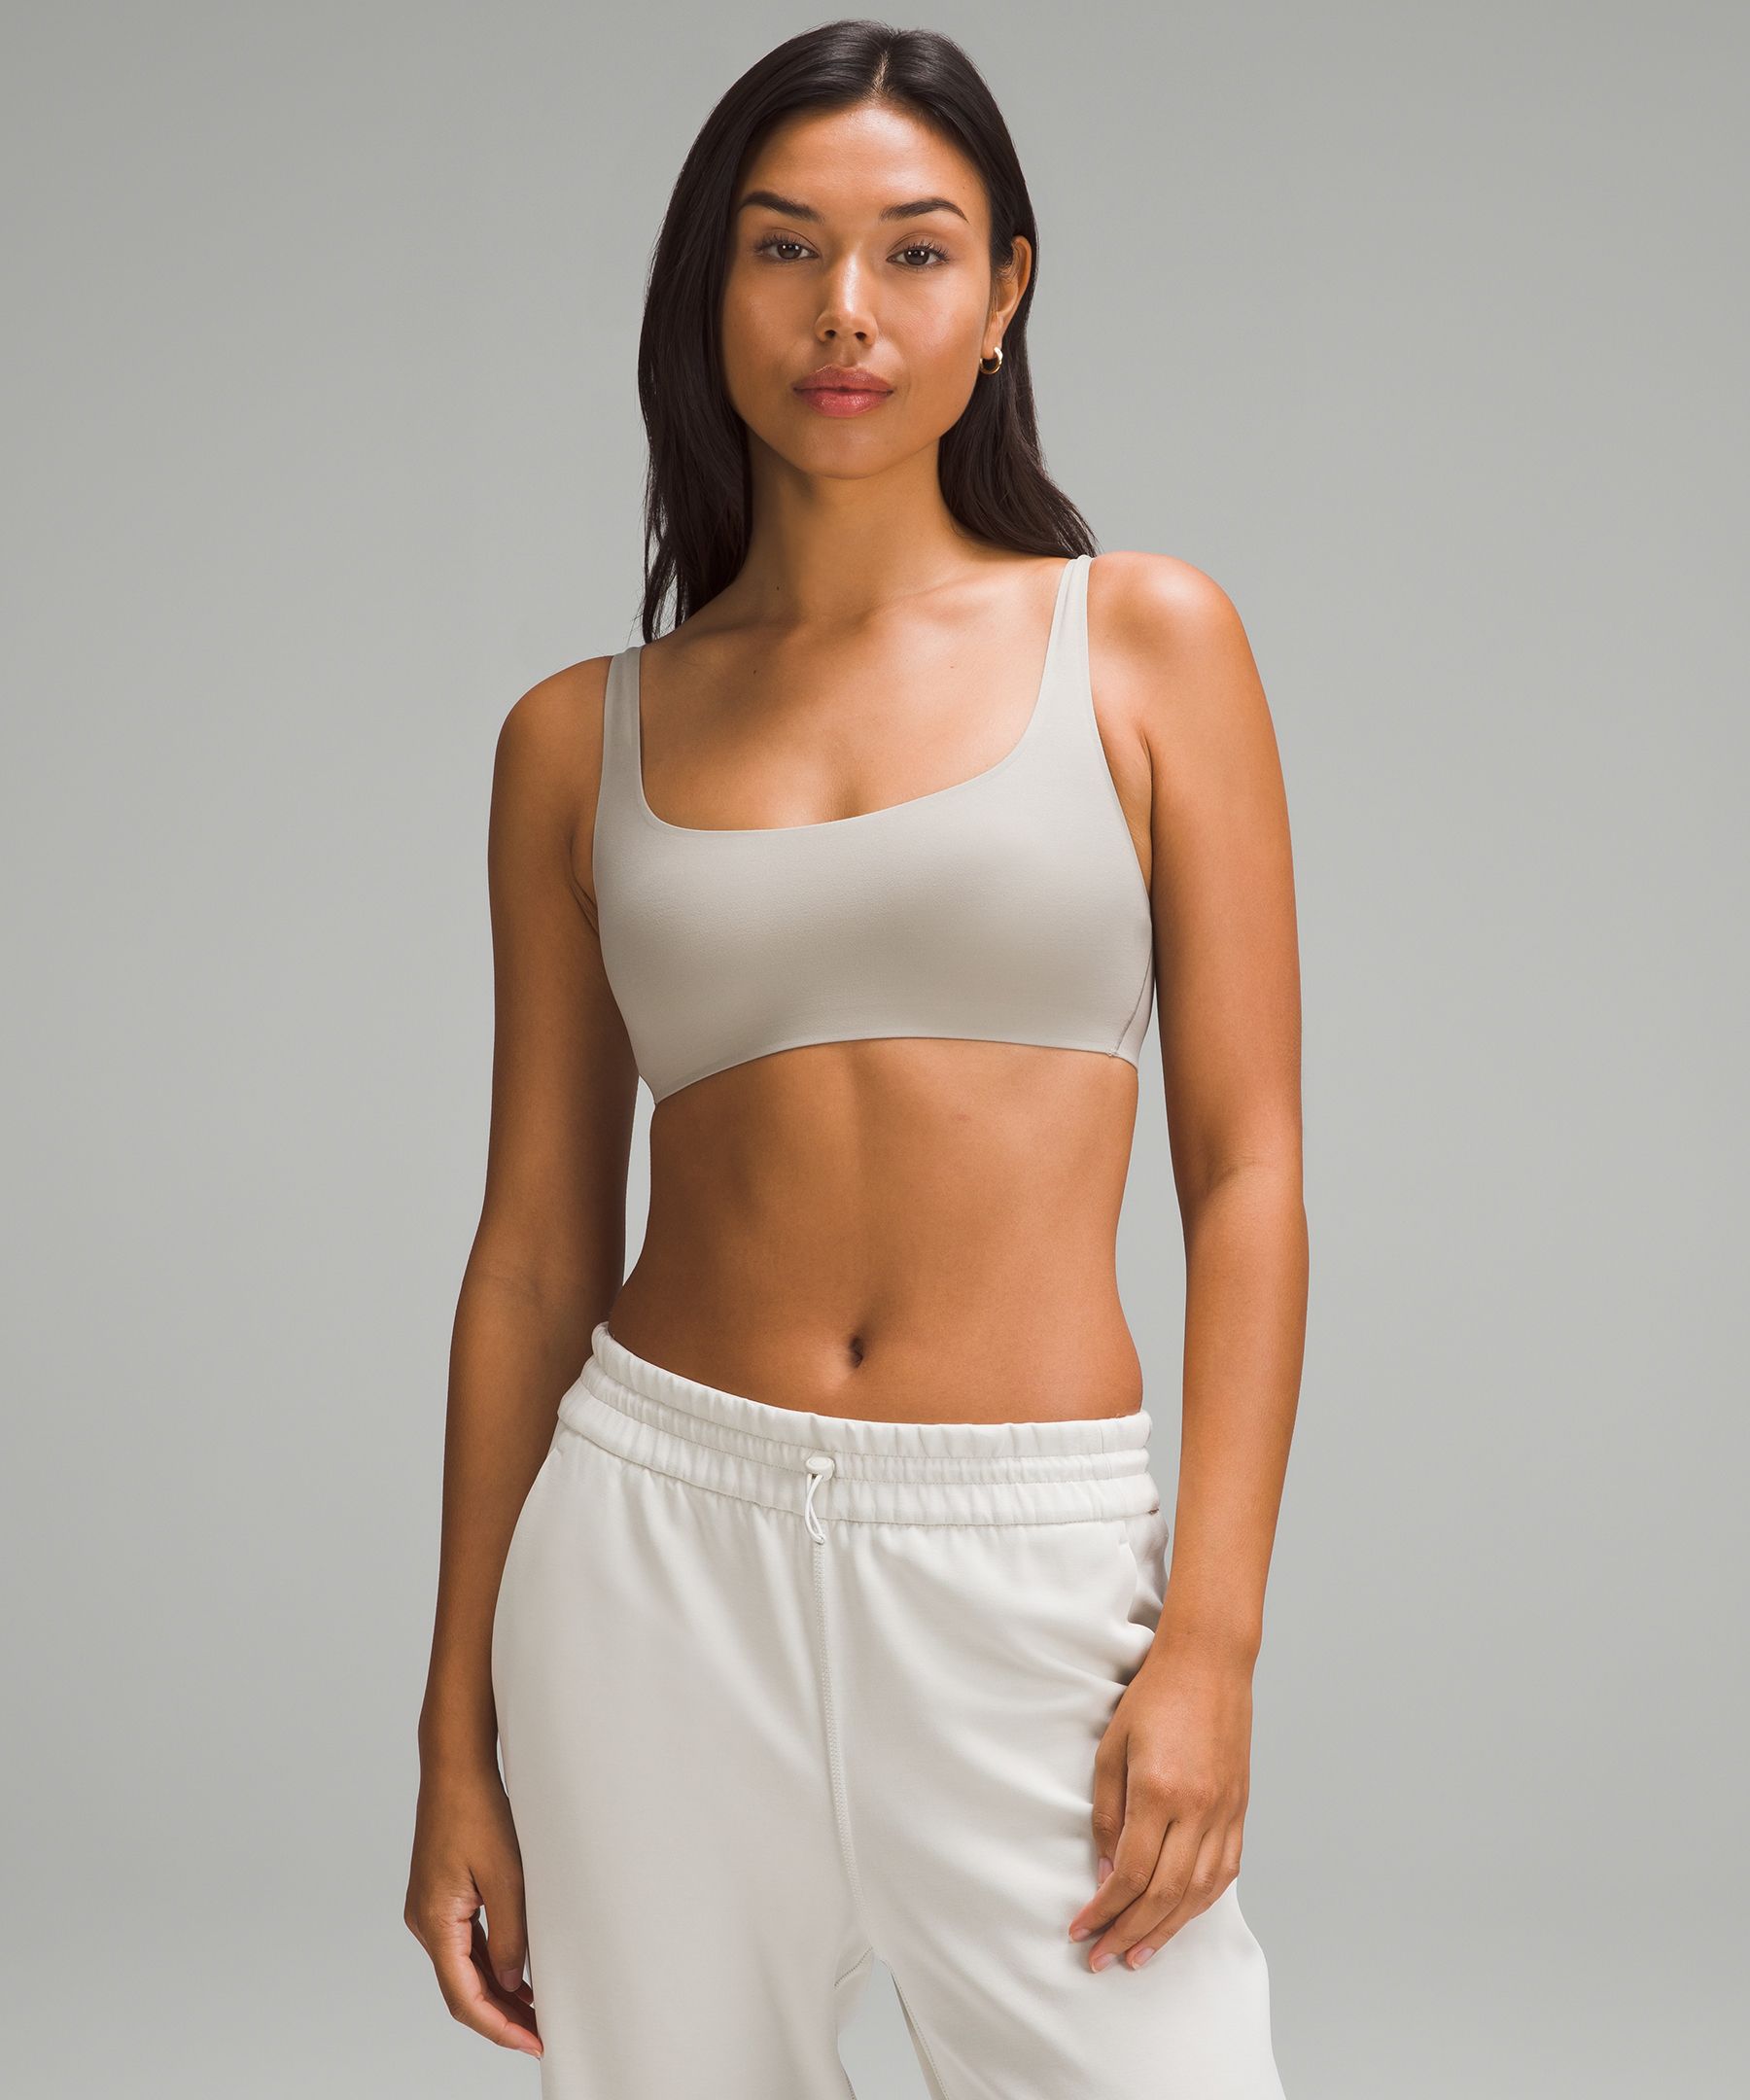 Lululemon All Sport Bra - Toothpaste - Supportive and Stylish